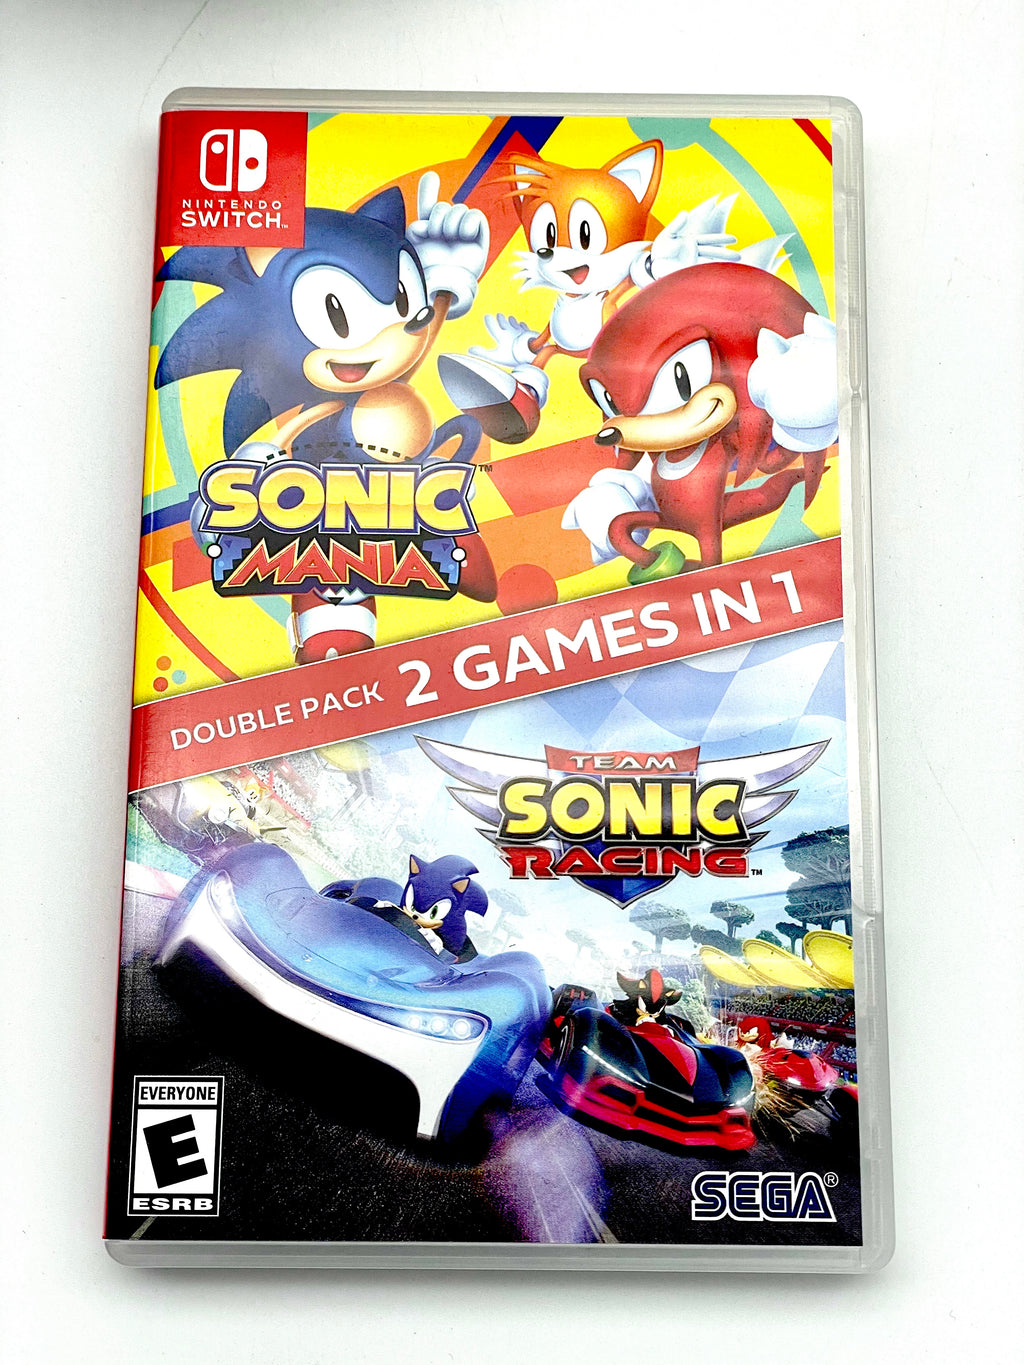 Sonic Mania + Team Sonic Racing Double Pack (2 Games in 1)(Nintendo Switch)  NEW